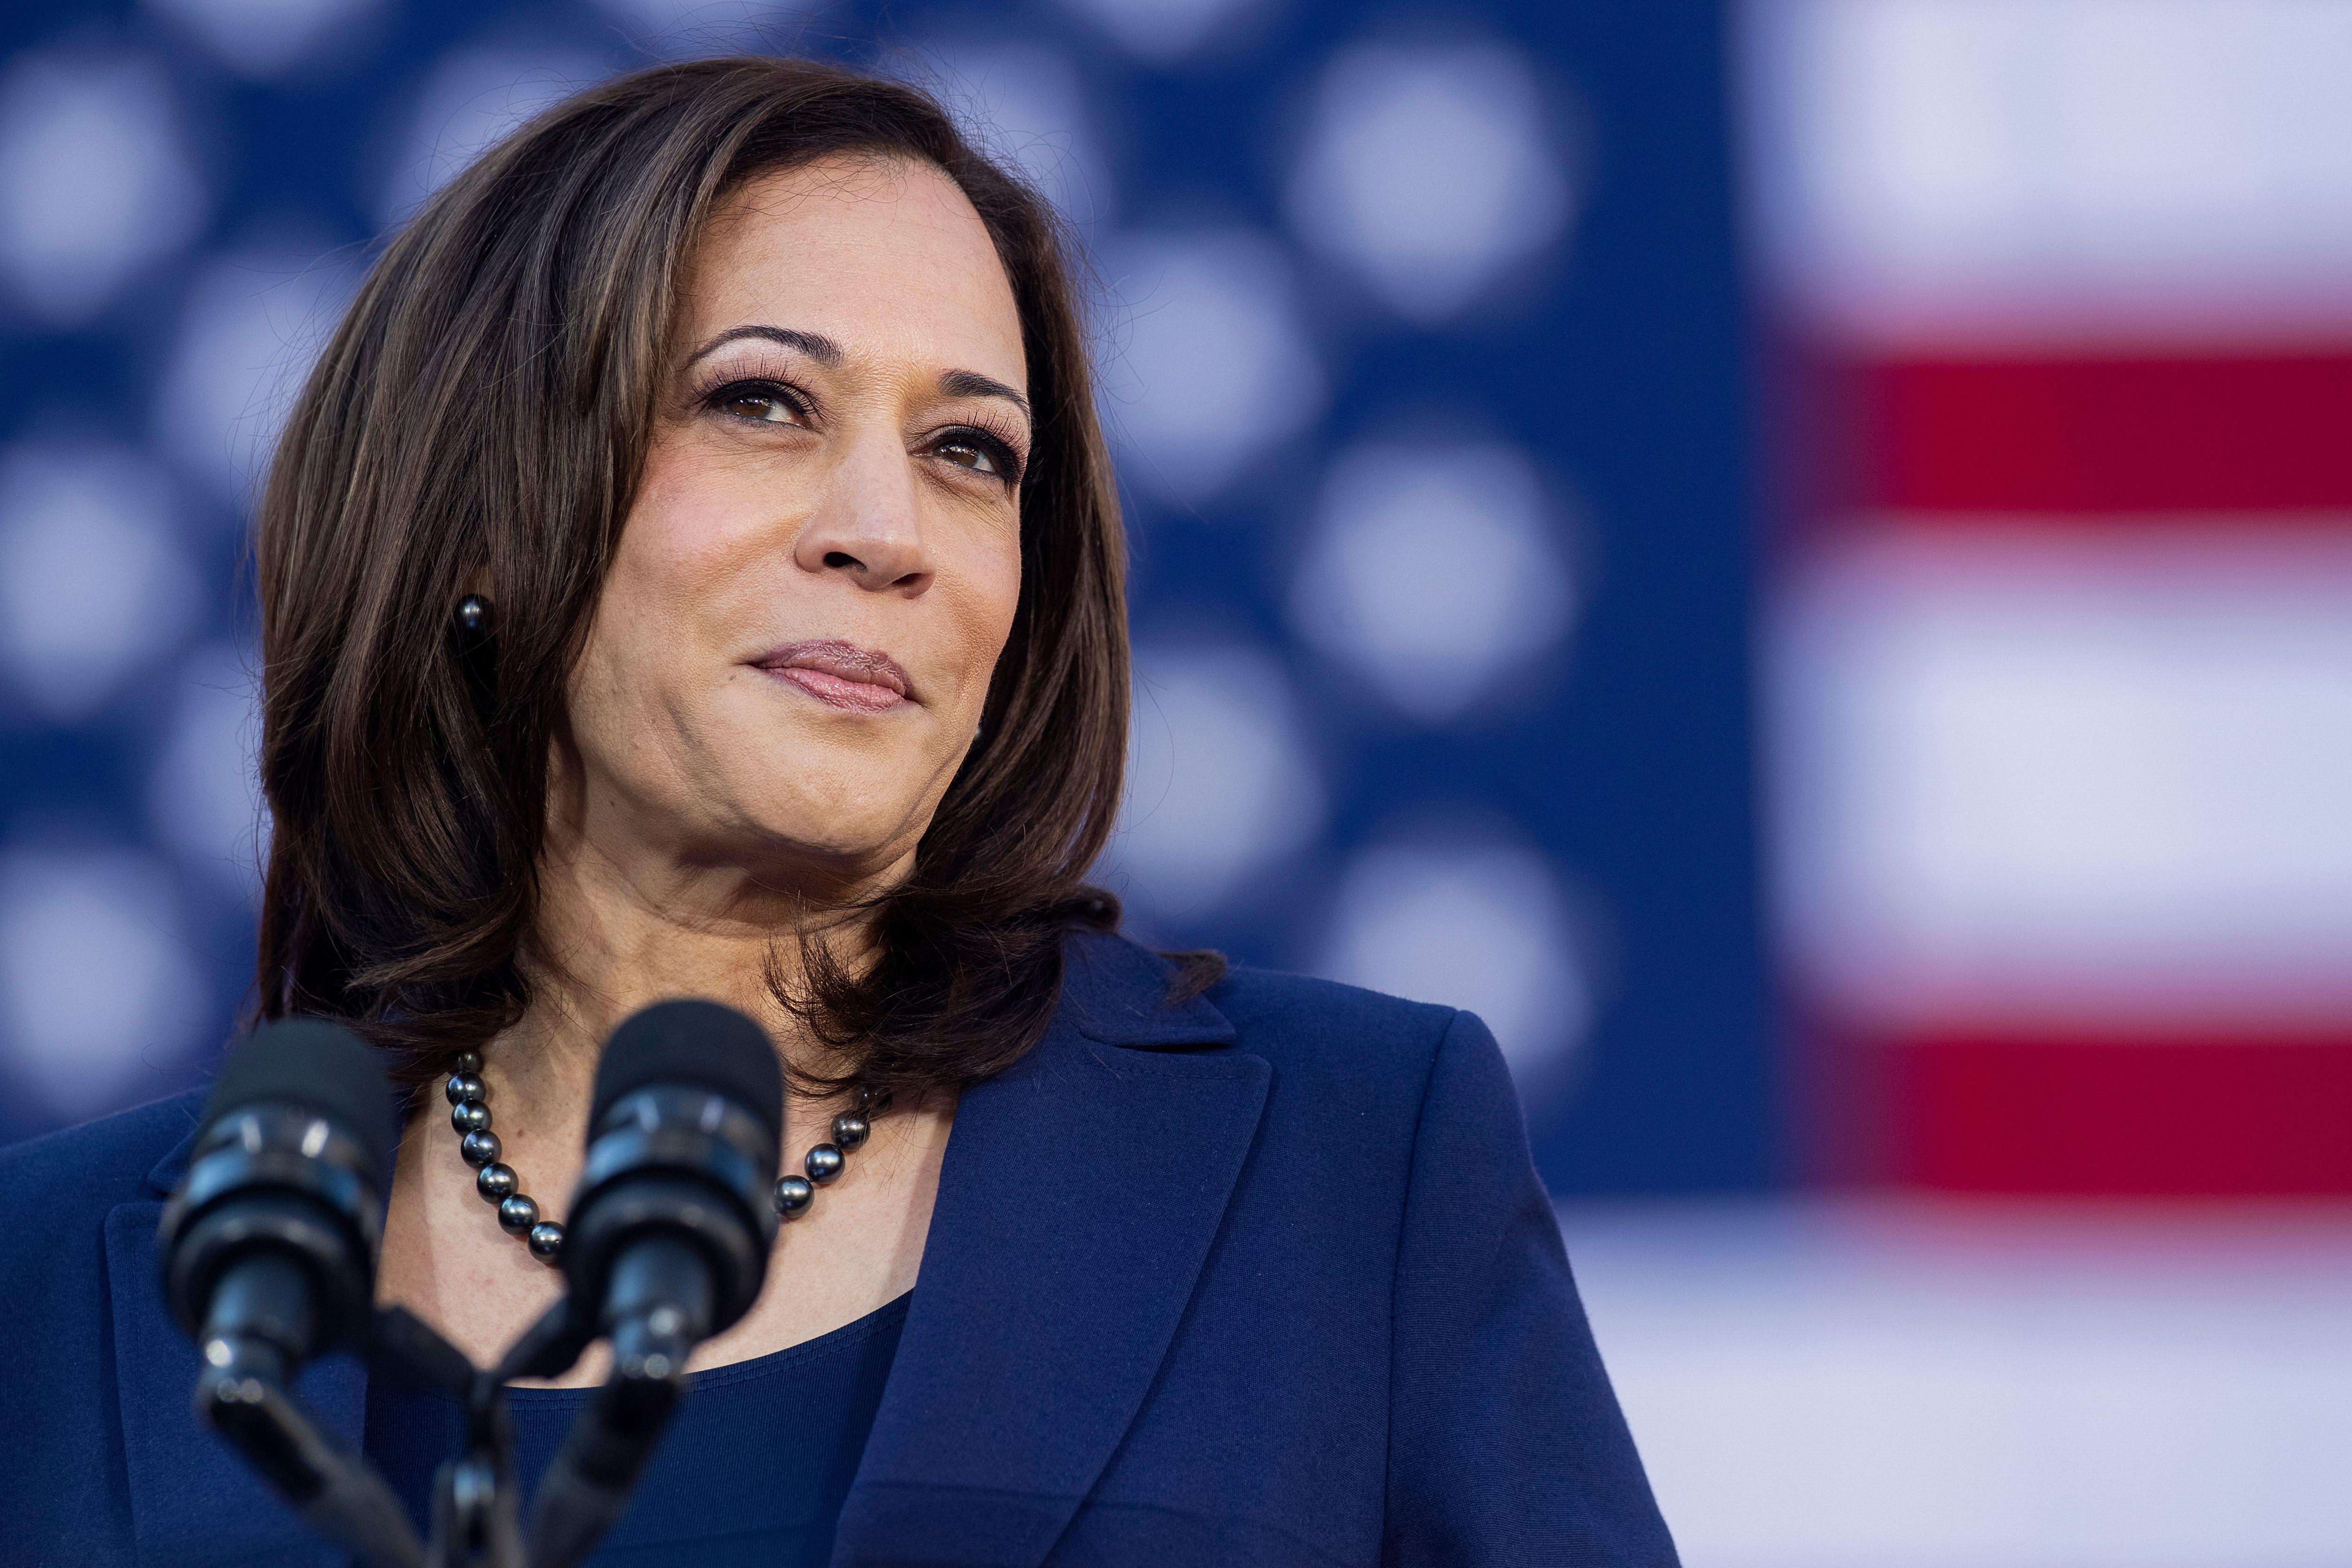 Kamala Harris standing at a mic in front of an American flag